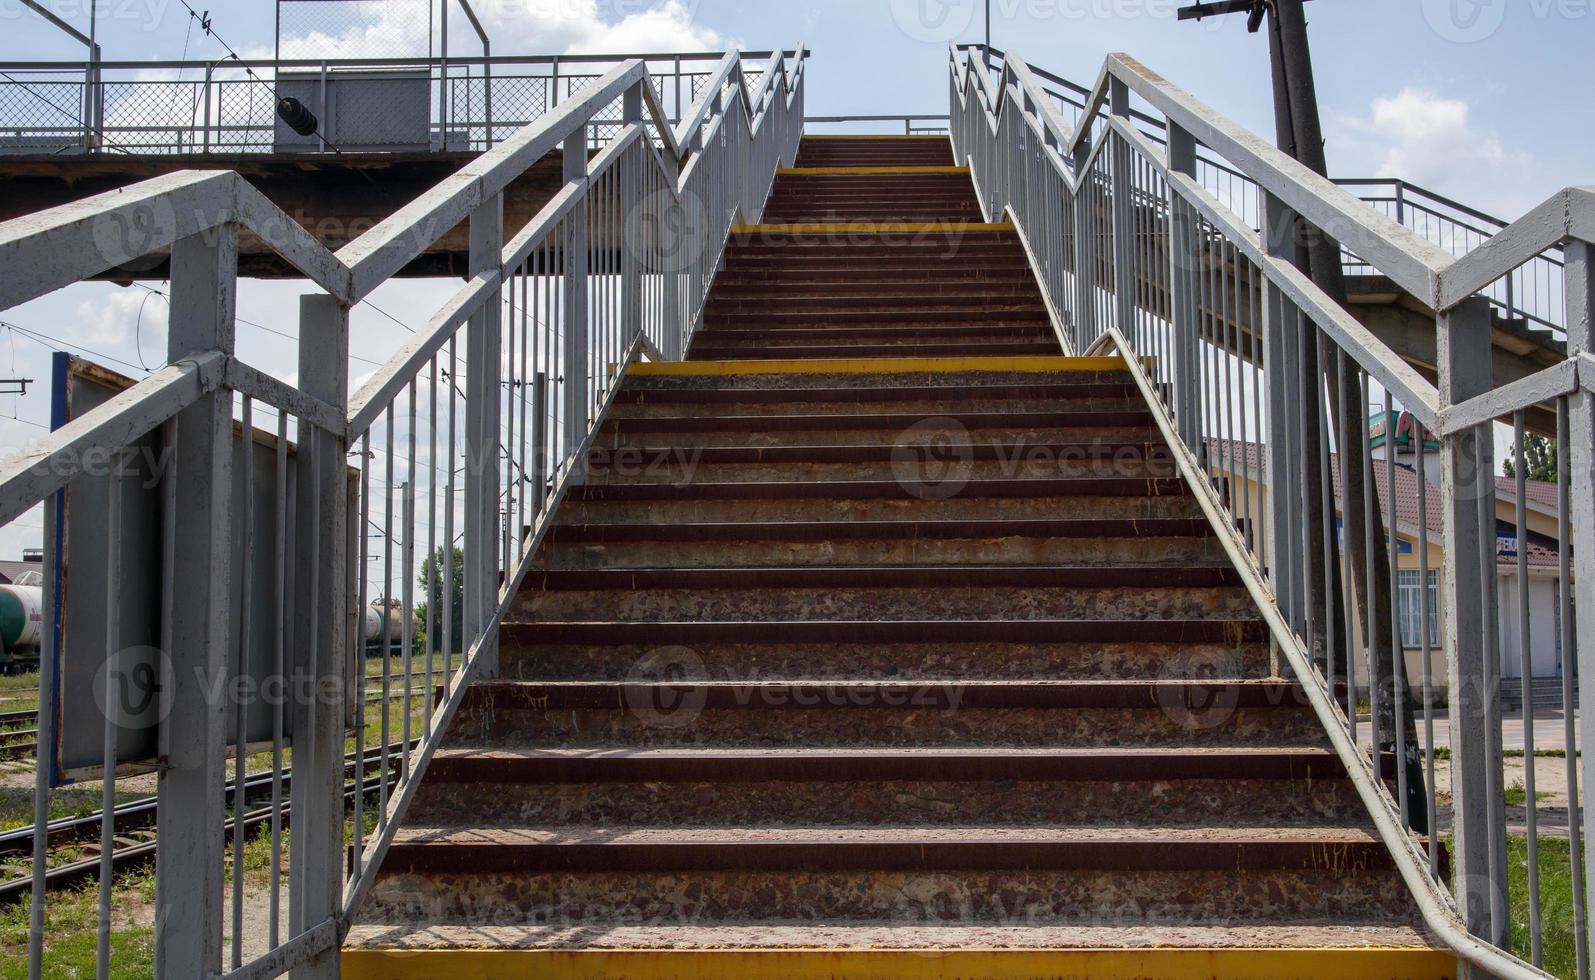 Railway bridge with steps, with impressive steps in perspective. Overhead pedestrian crossing. Bridge stairs connecting one platform to another at the train station. photo